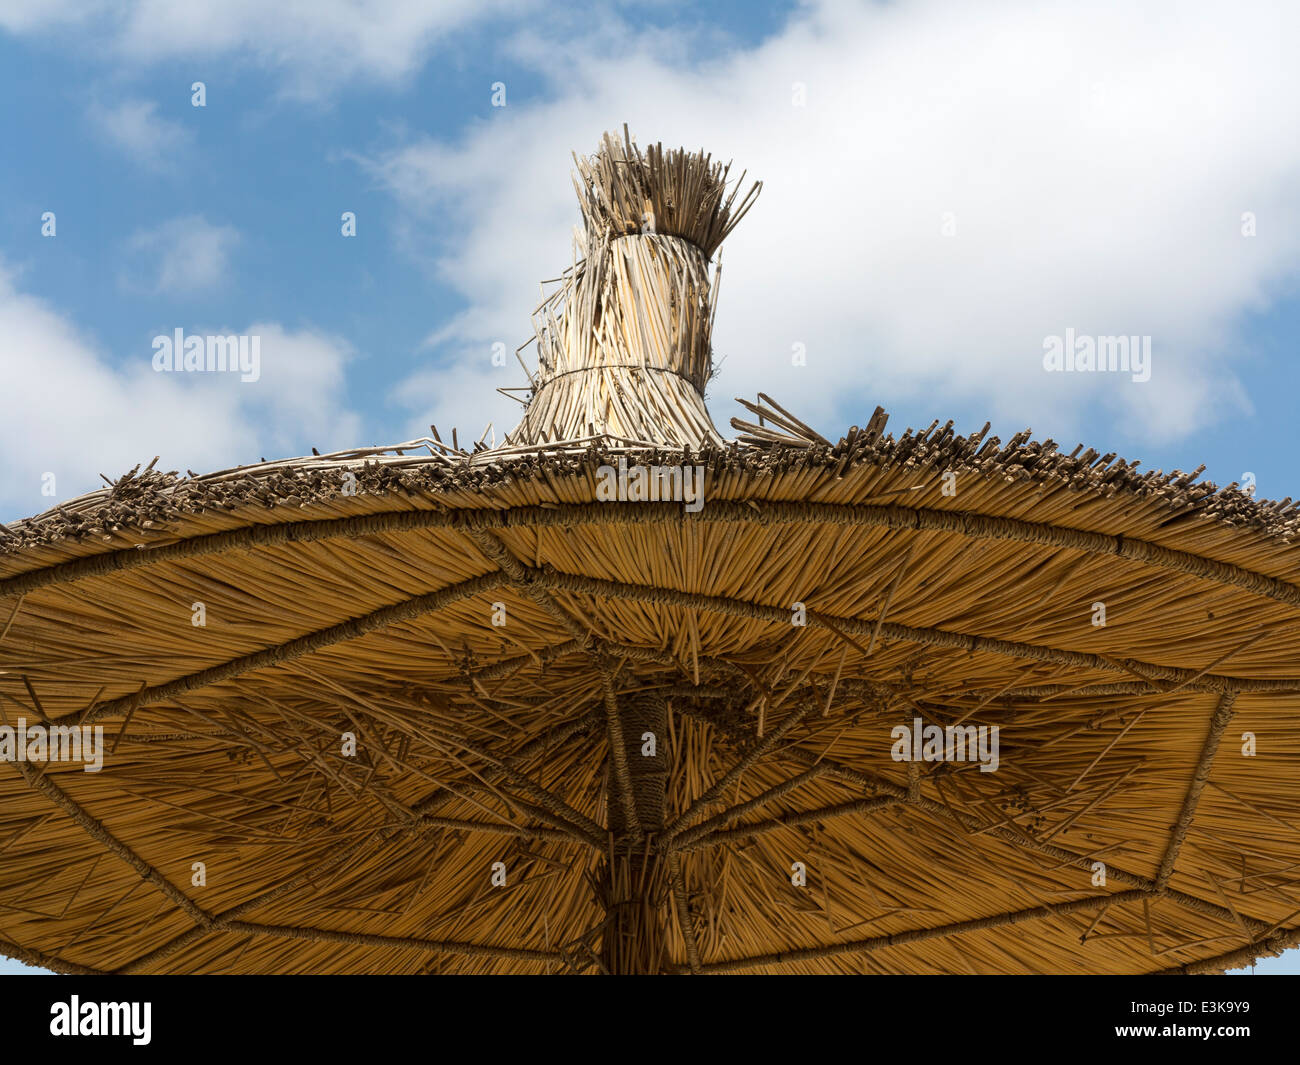 Detail of a section of straw sunshade umbrella looking up at the underside against a blue sky with light cloud Stock Photo